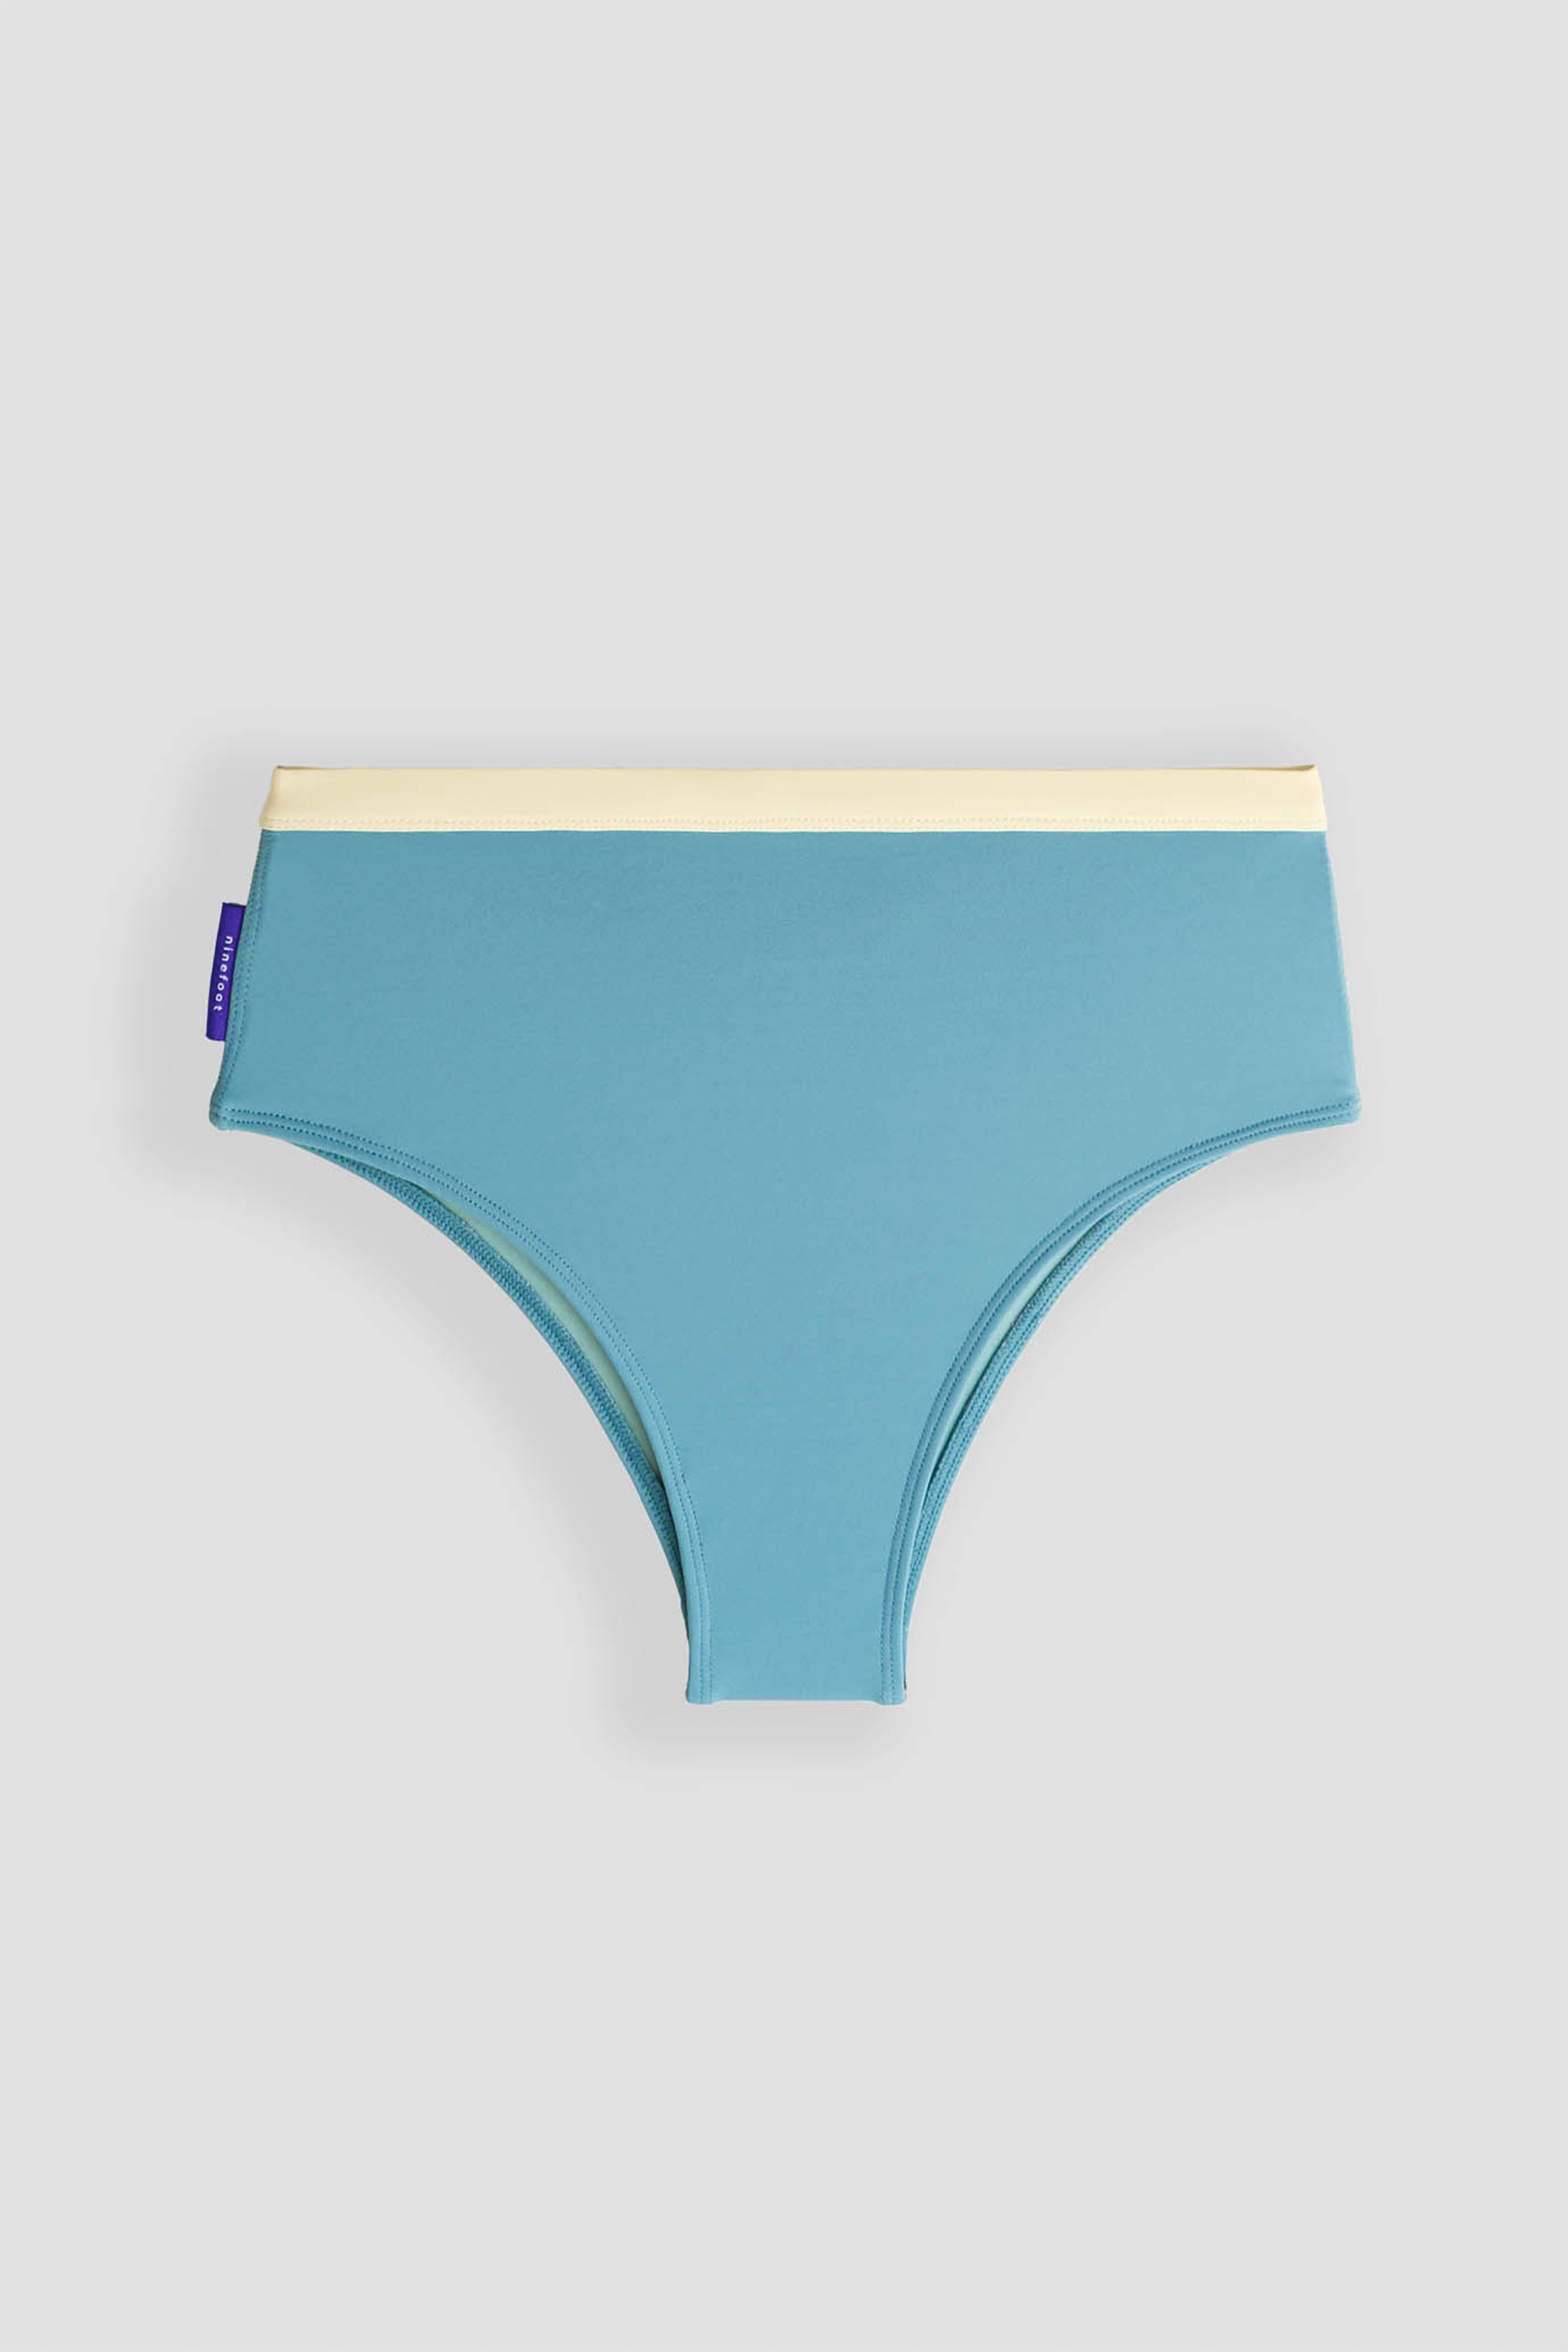 rote surf bikini bottom in stone blue color flat photo front side